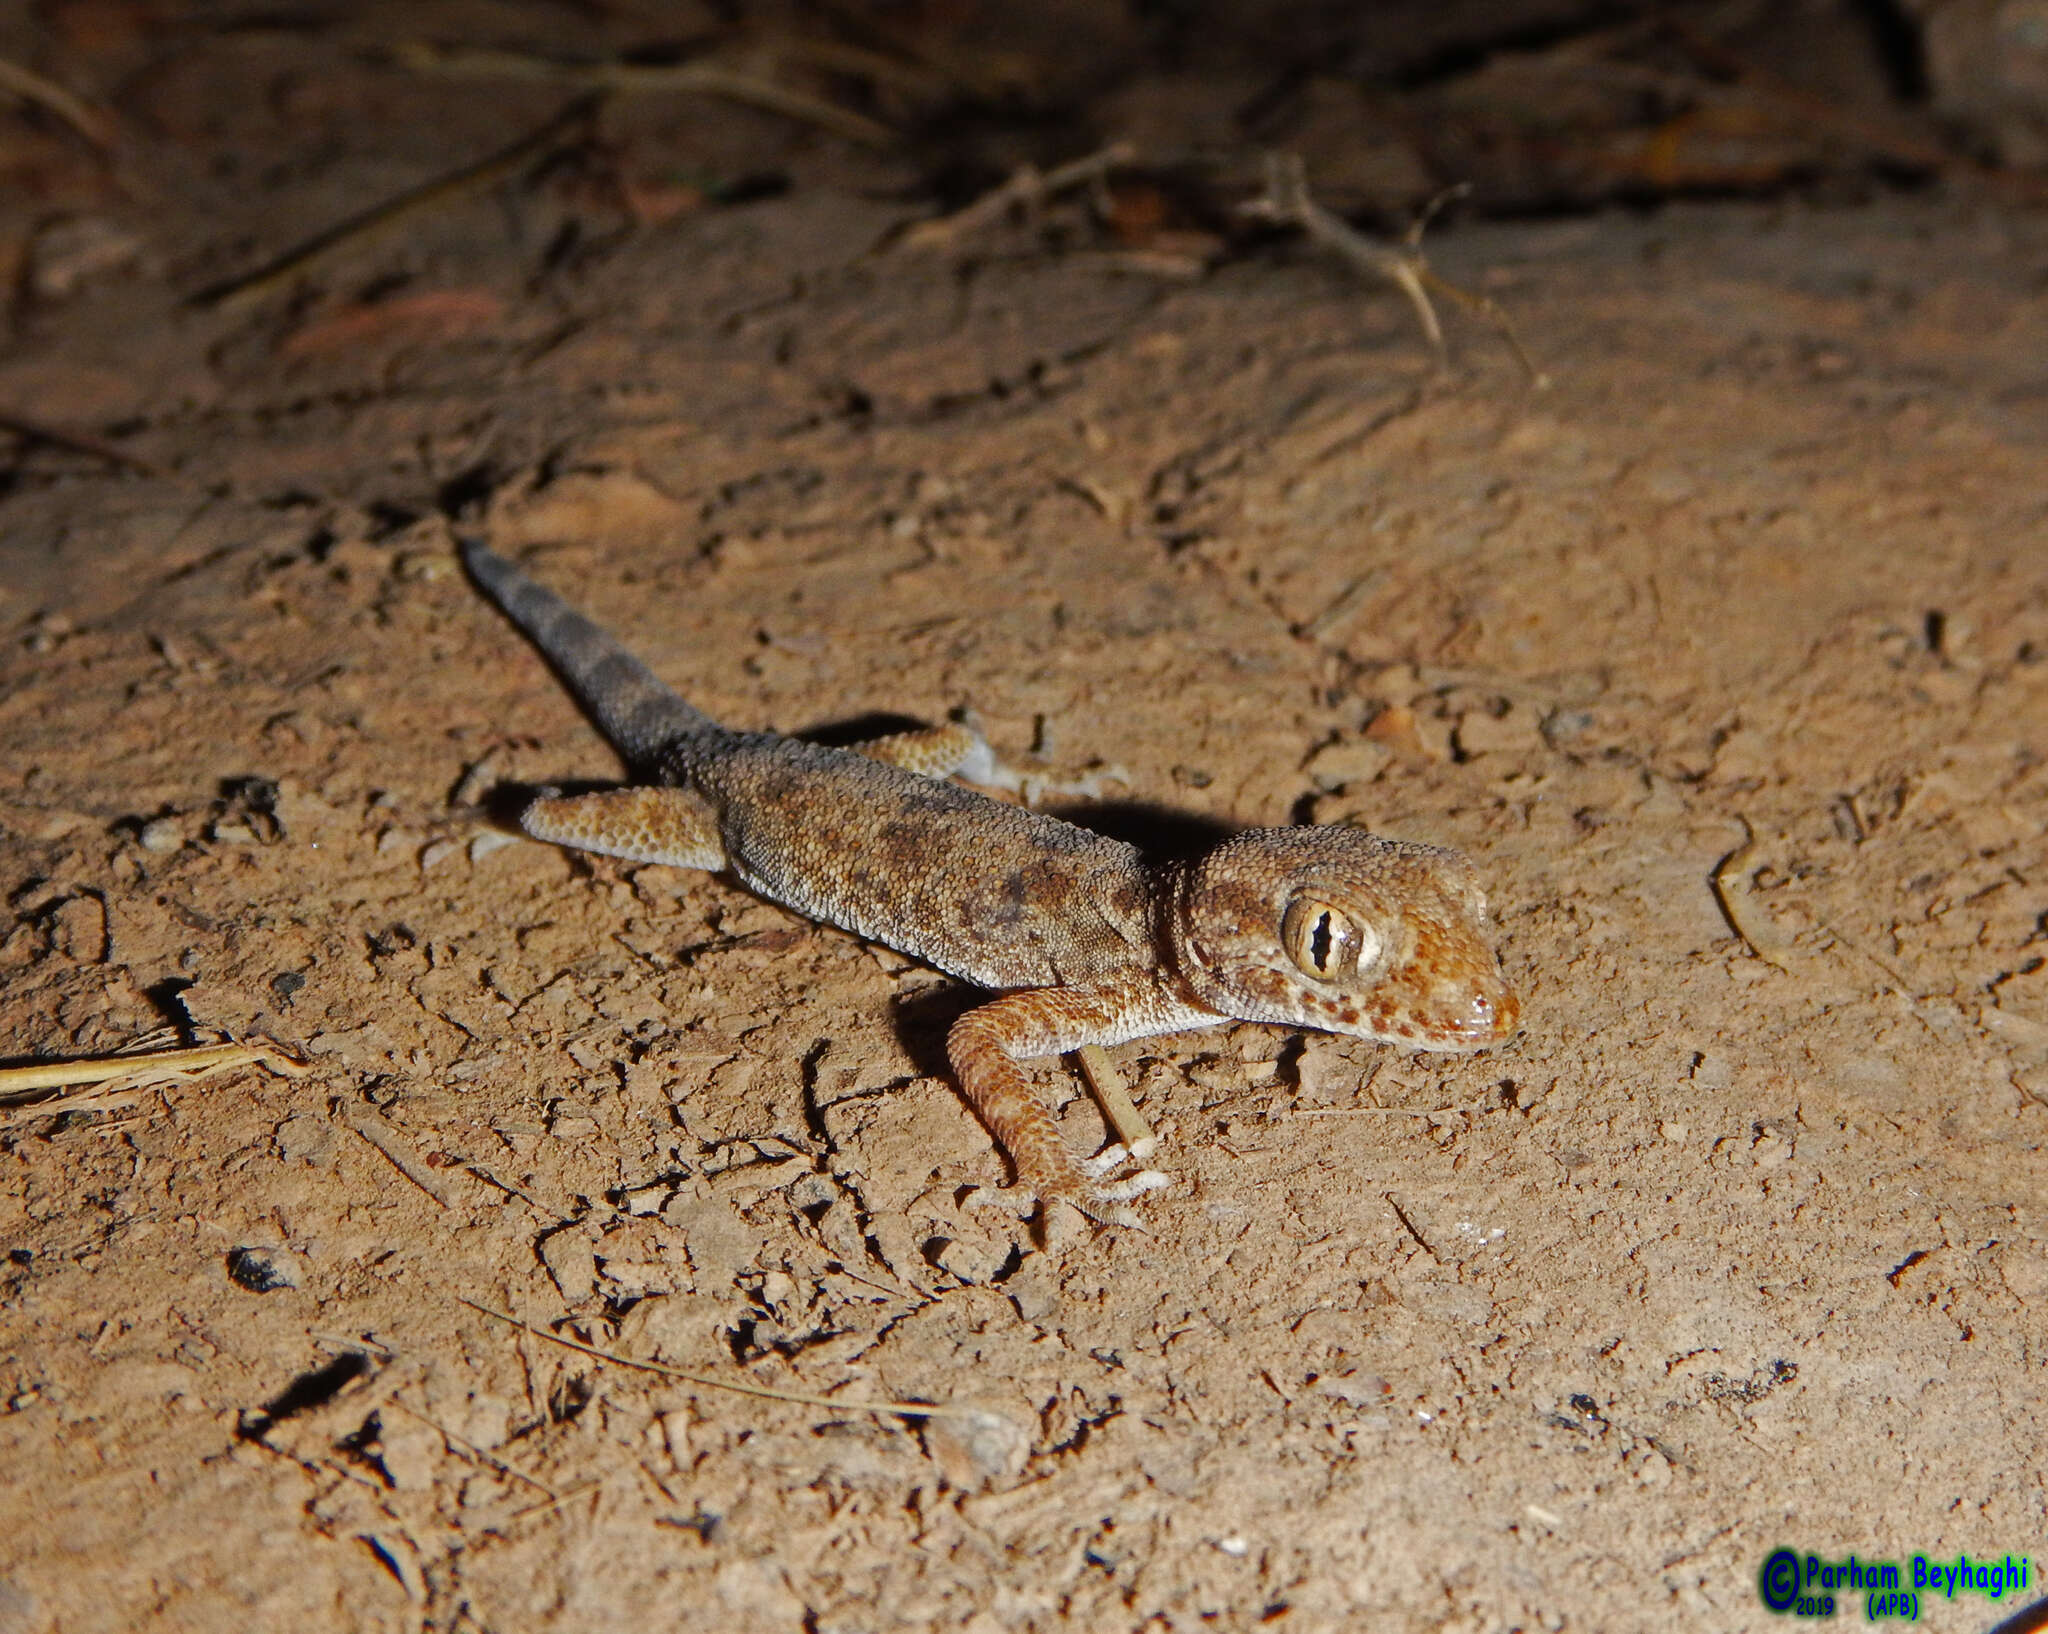 Image of Thick-tailed Tuberculated Gecko